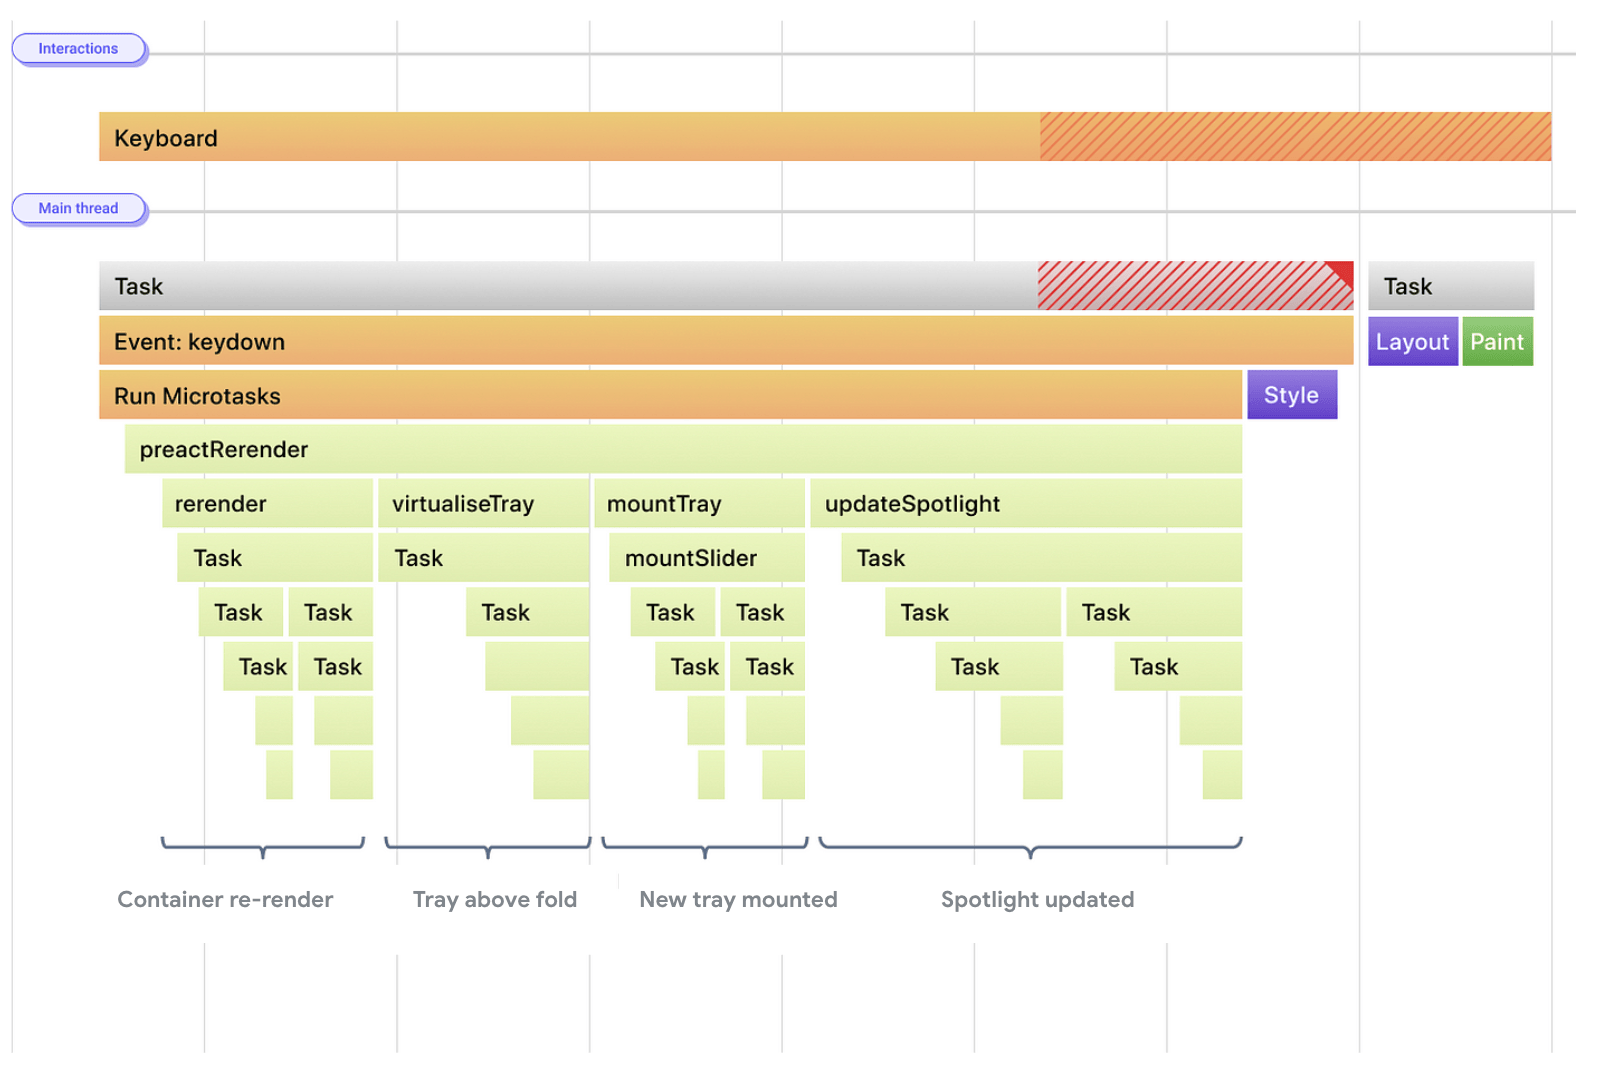 A stylized visualization of tasks for running event handlers and rendering updates. The rendering updates are postponed after a single long task.